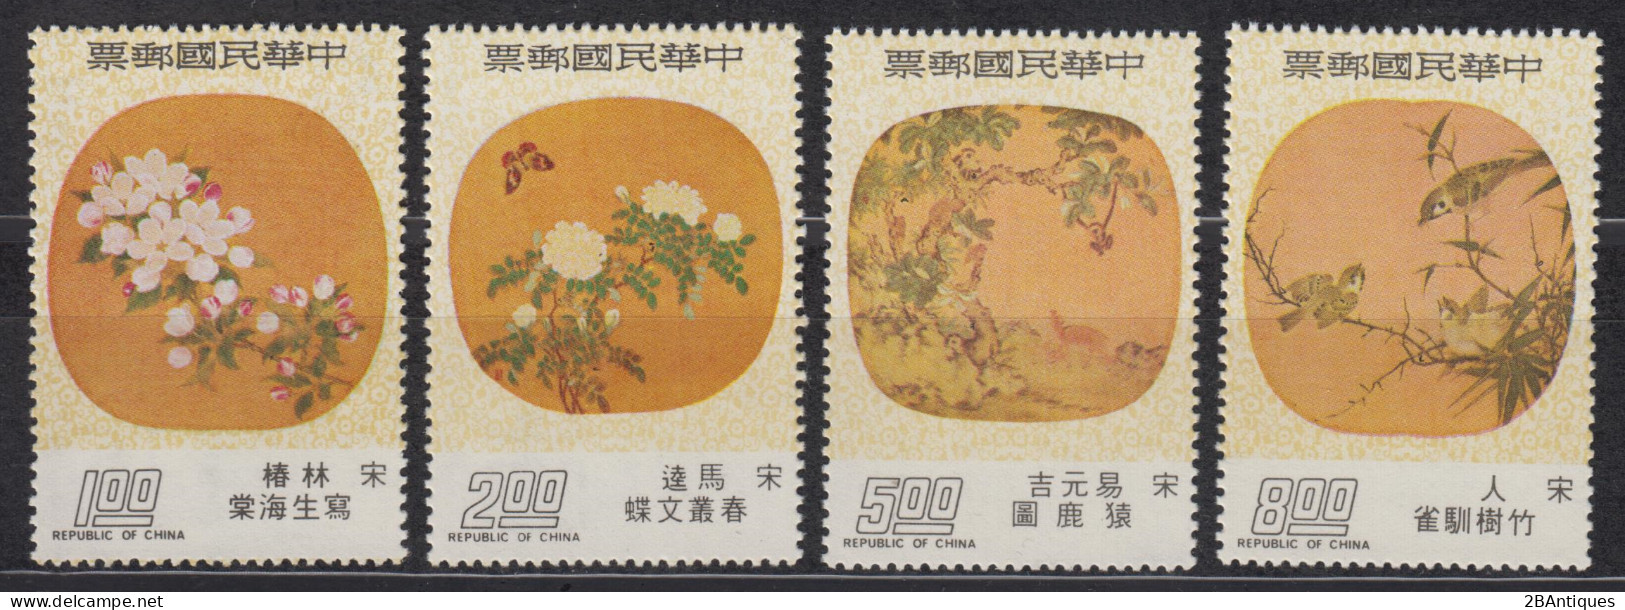 TAIWAN 1975 - Ancient Chinese Moon-shaped Fan Paintings MNH** OG XF - Ungebraucht